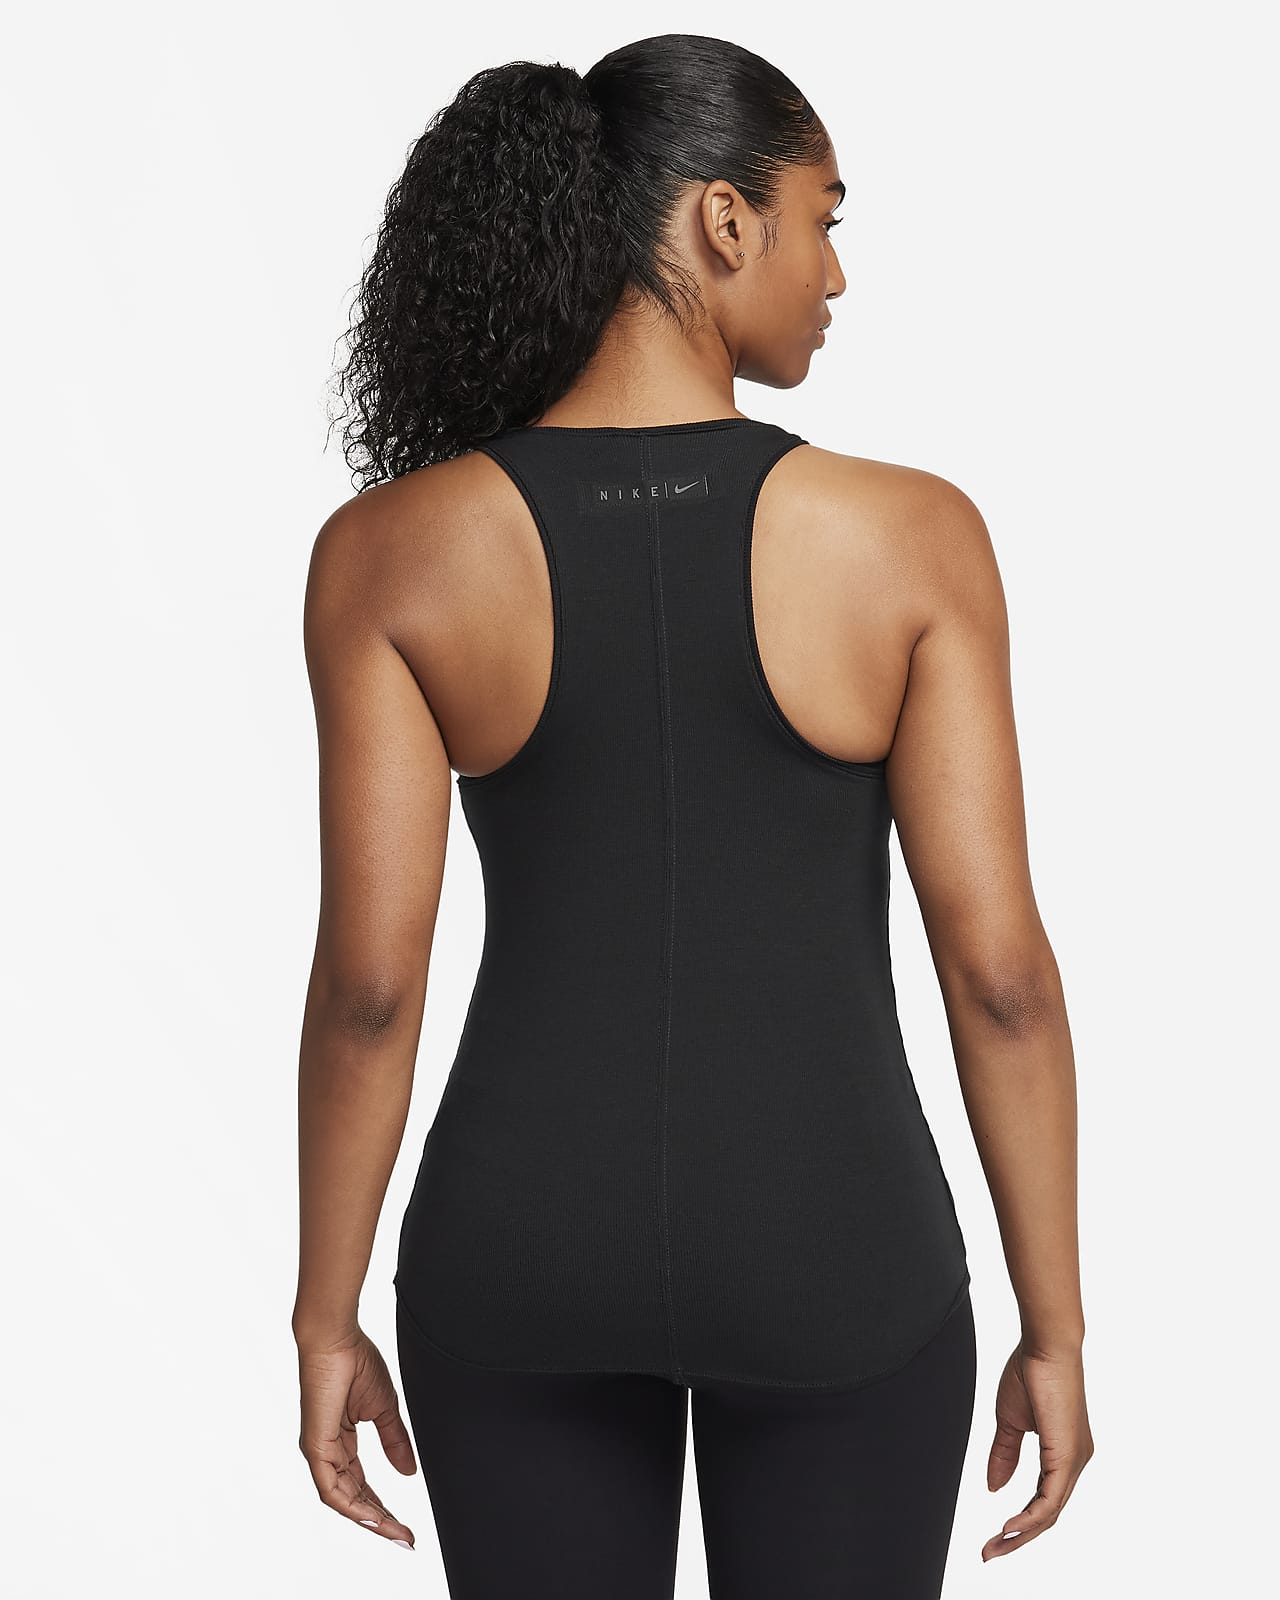 Nike the yoga luxe tank, tops and shirts, Training